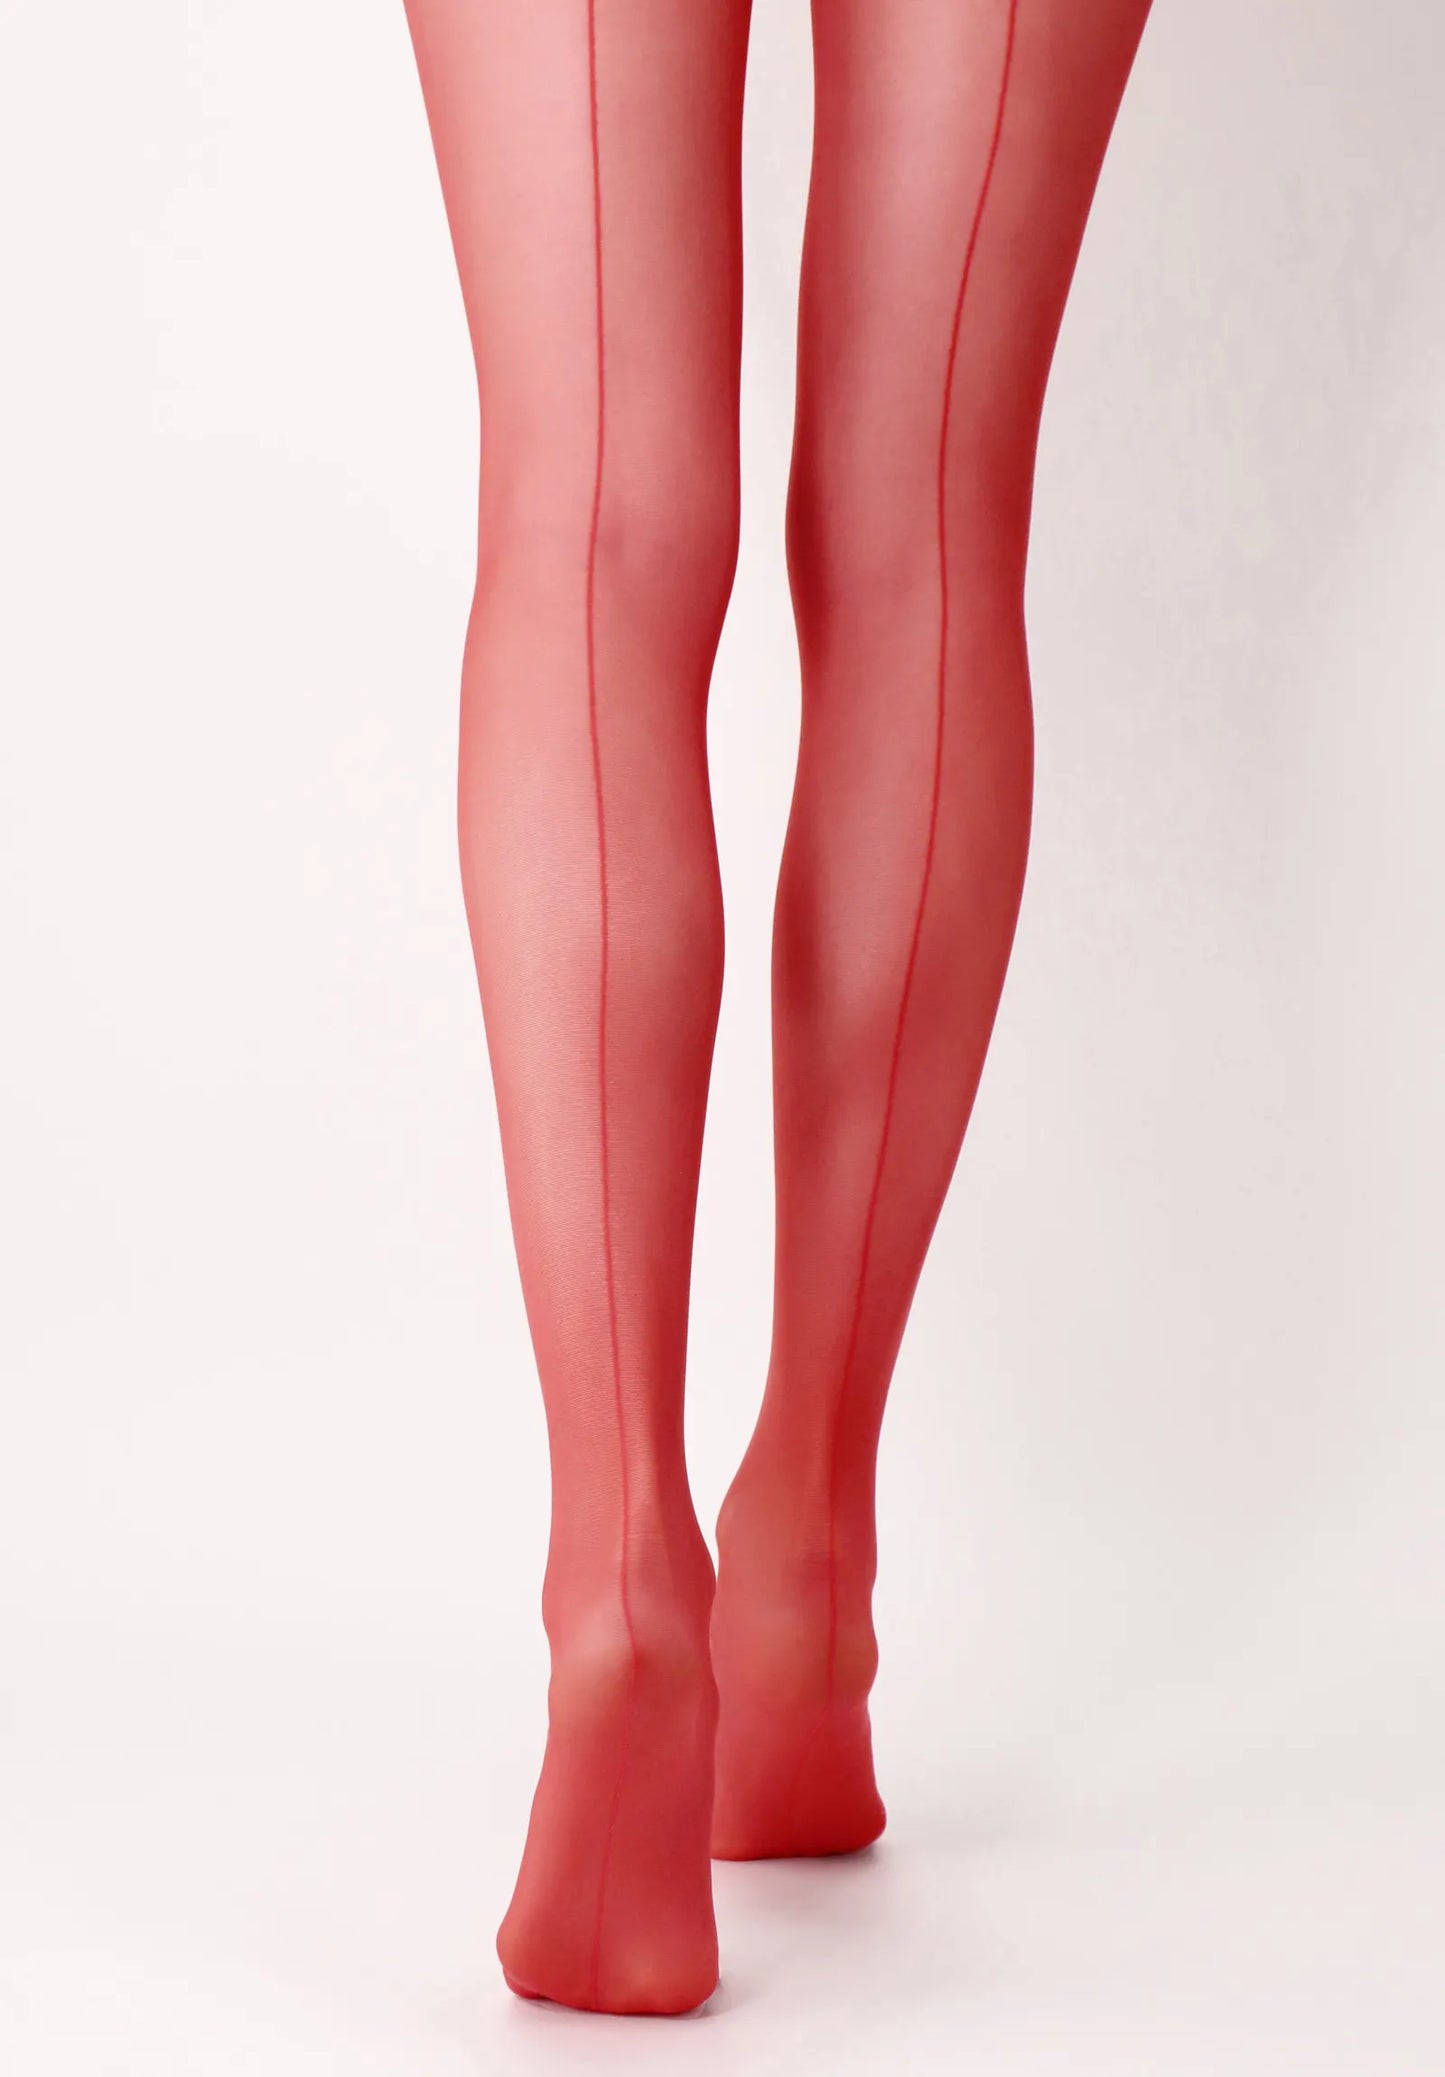 Oroblù Shock Up Line Tights - Sheer red tights with a back-seam line, shaping push-up panty control-top